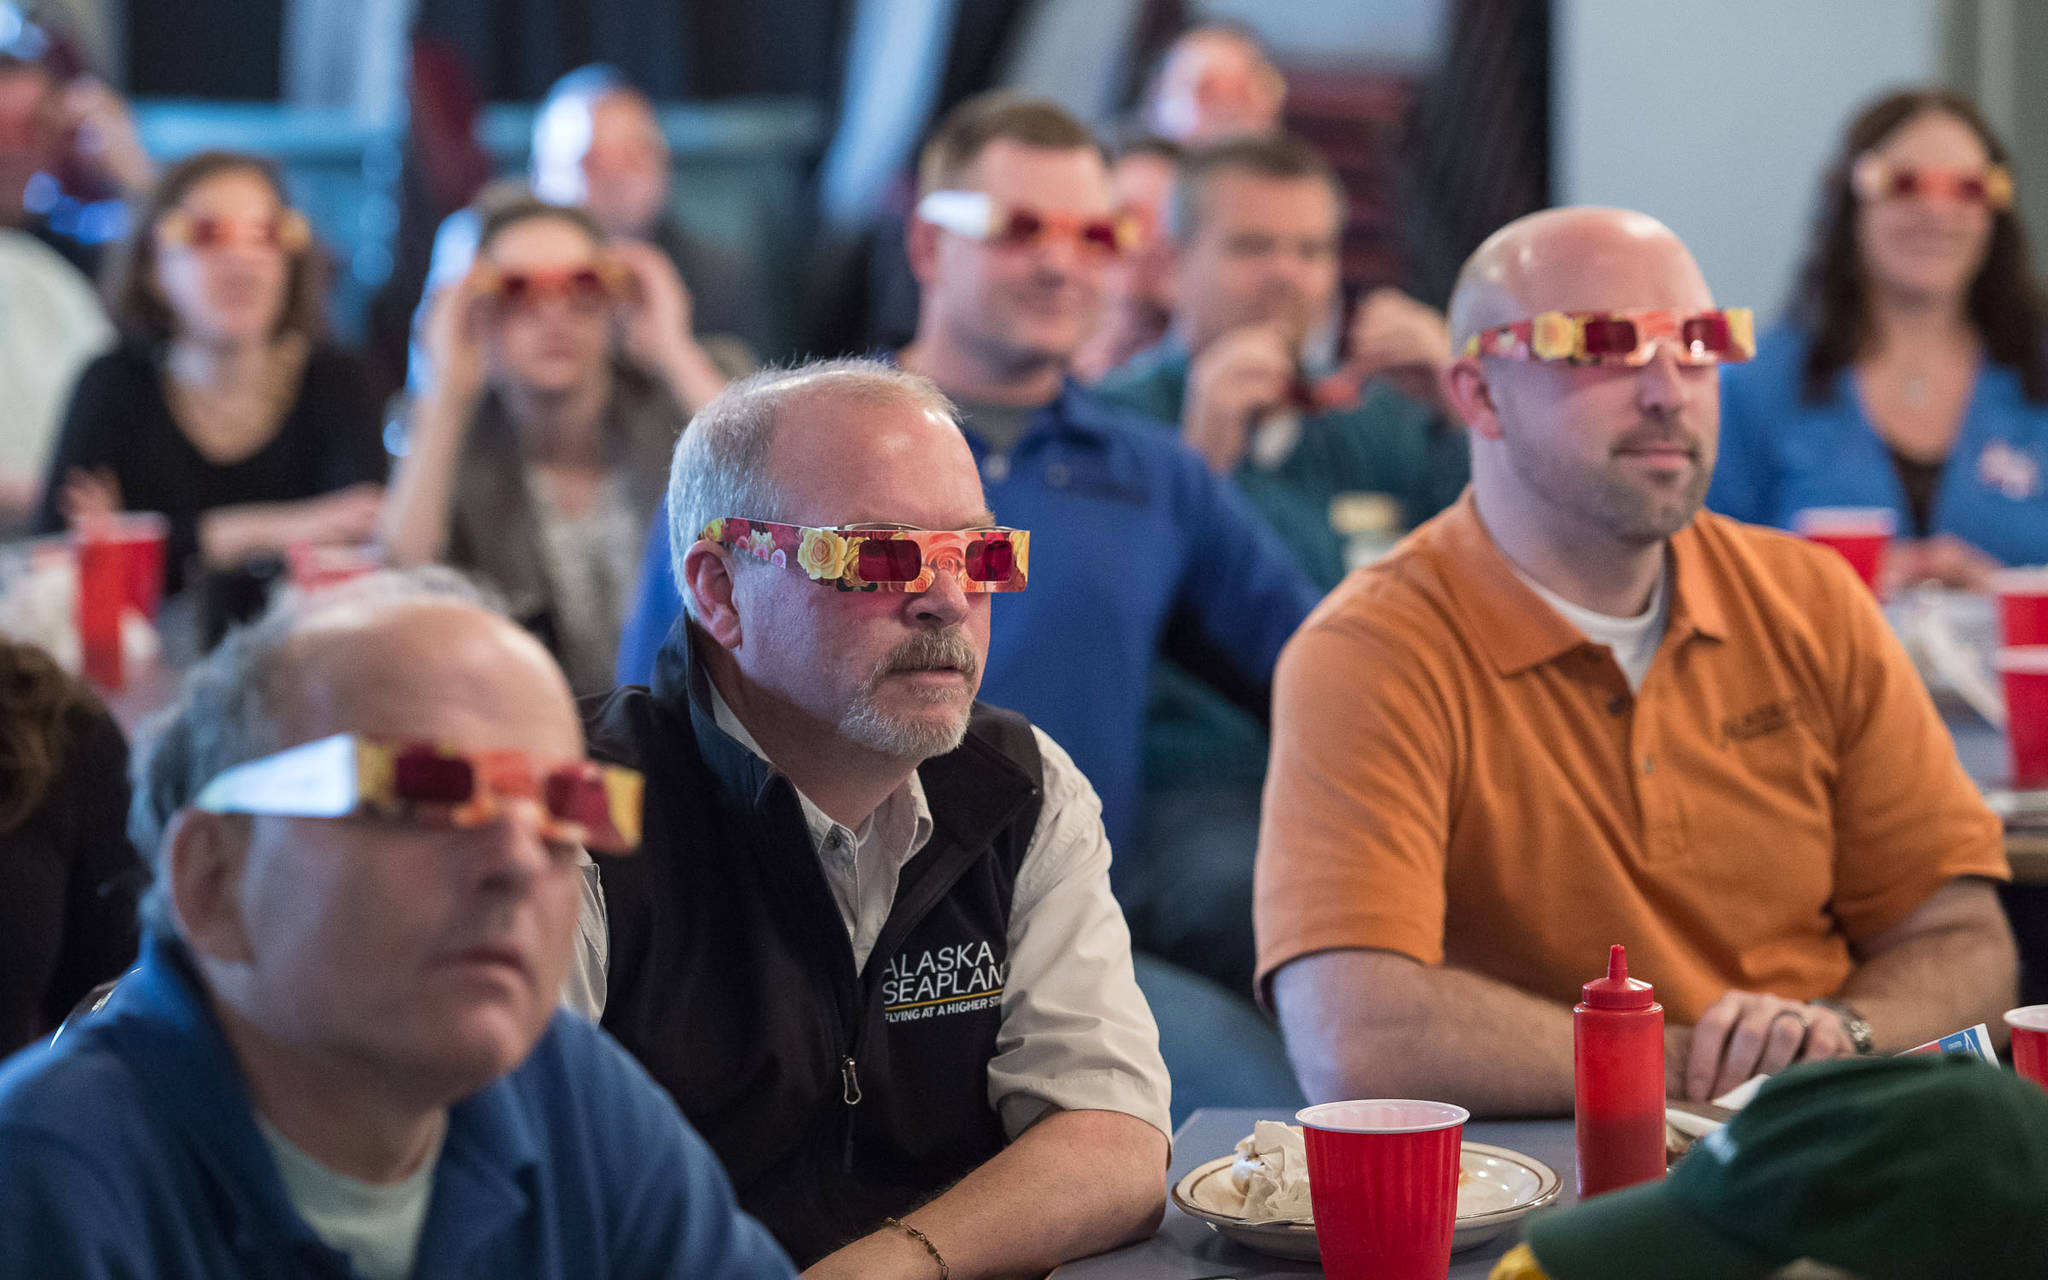 Attendees of the Juneau Chamber of Commerce luncheon don “rose-colored glasses” to view economic data presented by Brian Holst, executive director of the Juneau Economic Development Council at the Moose Lodge on Thursday, Sept. 28, 2017. (Michael Penn | Juneau Empire)